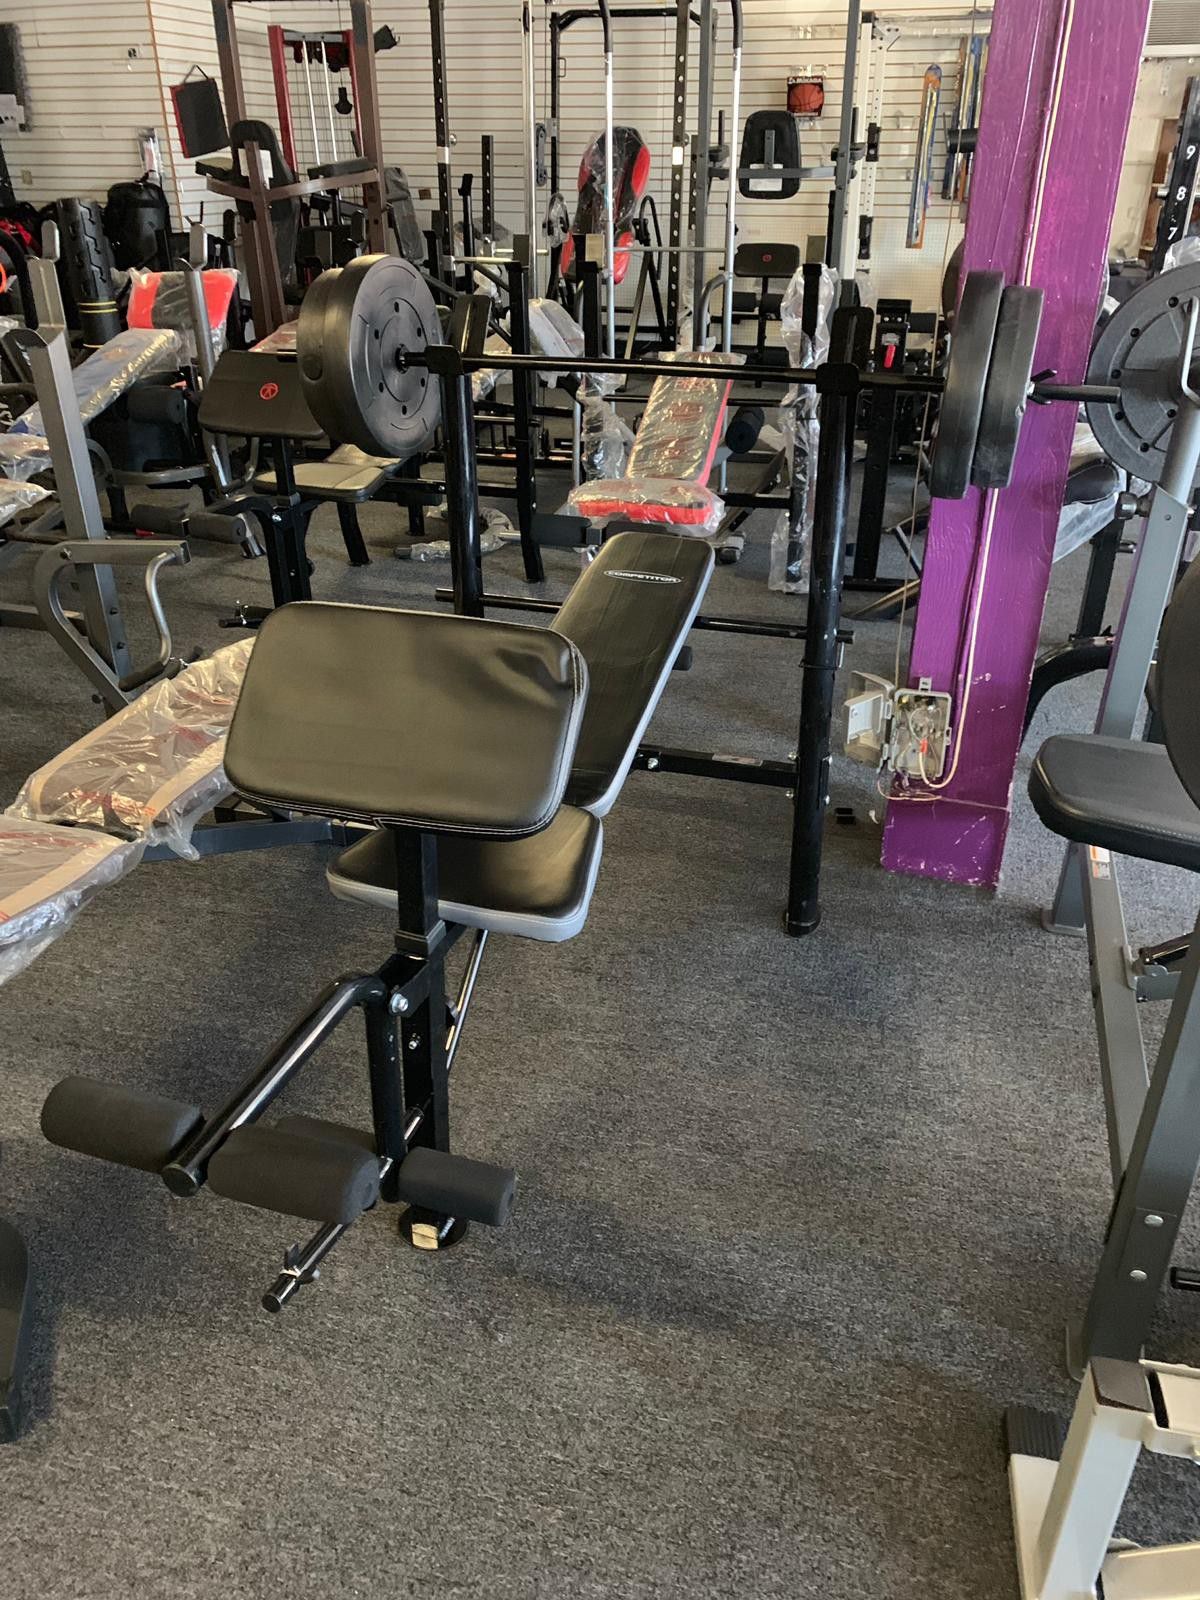 Bench bar and weights brand new